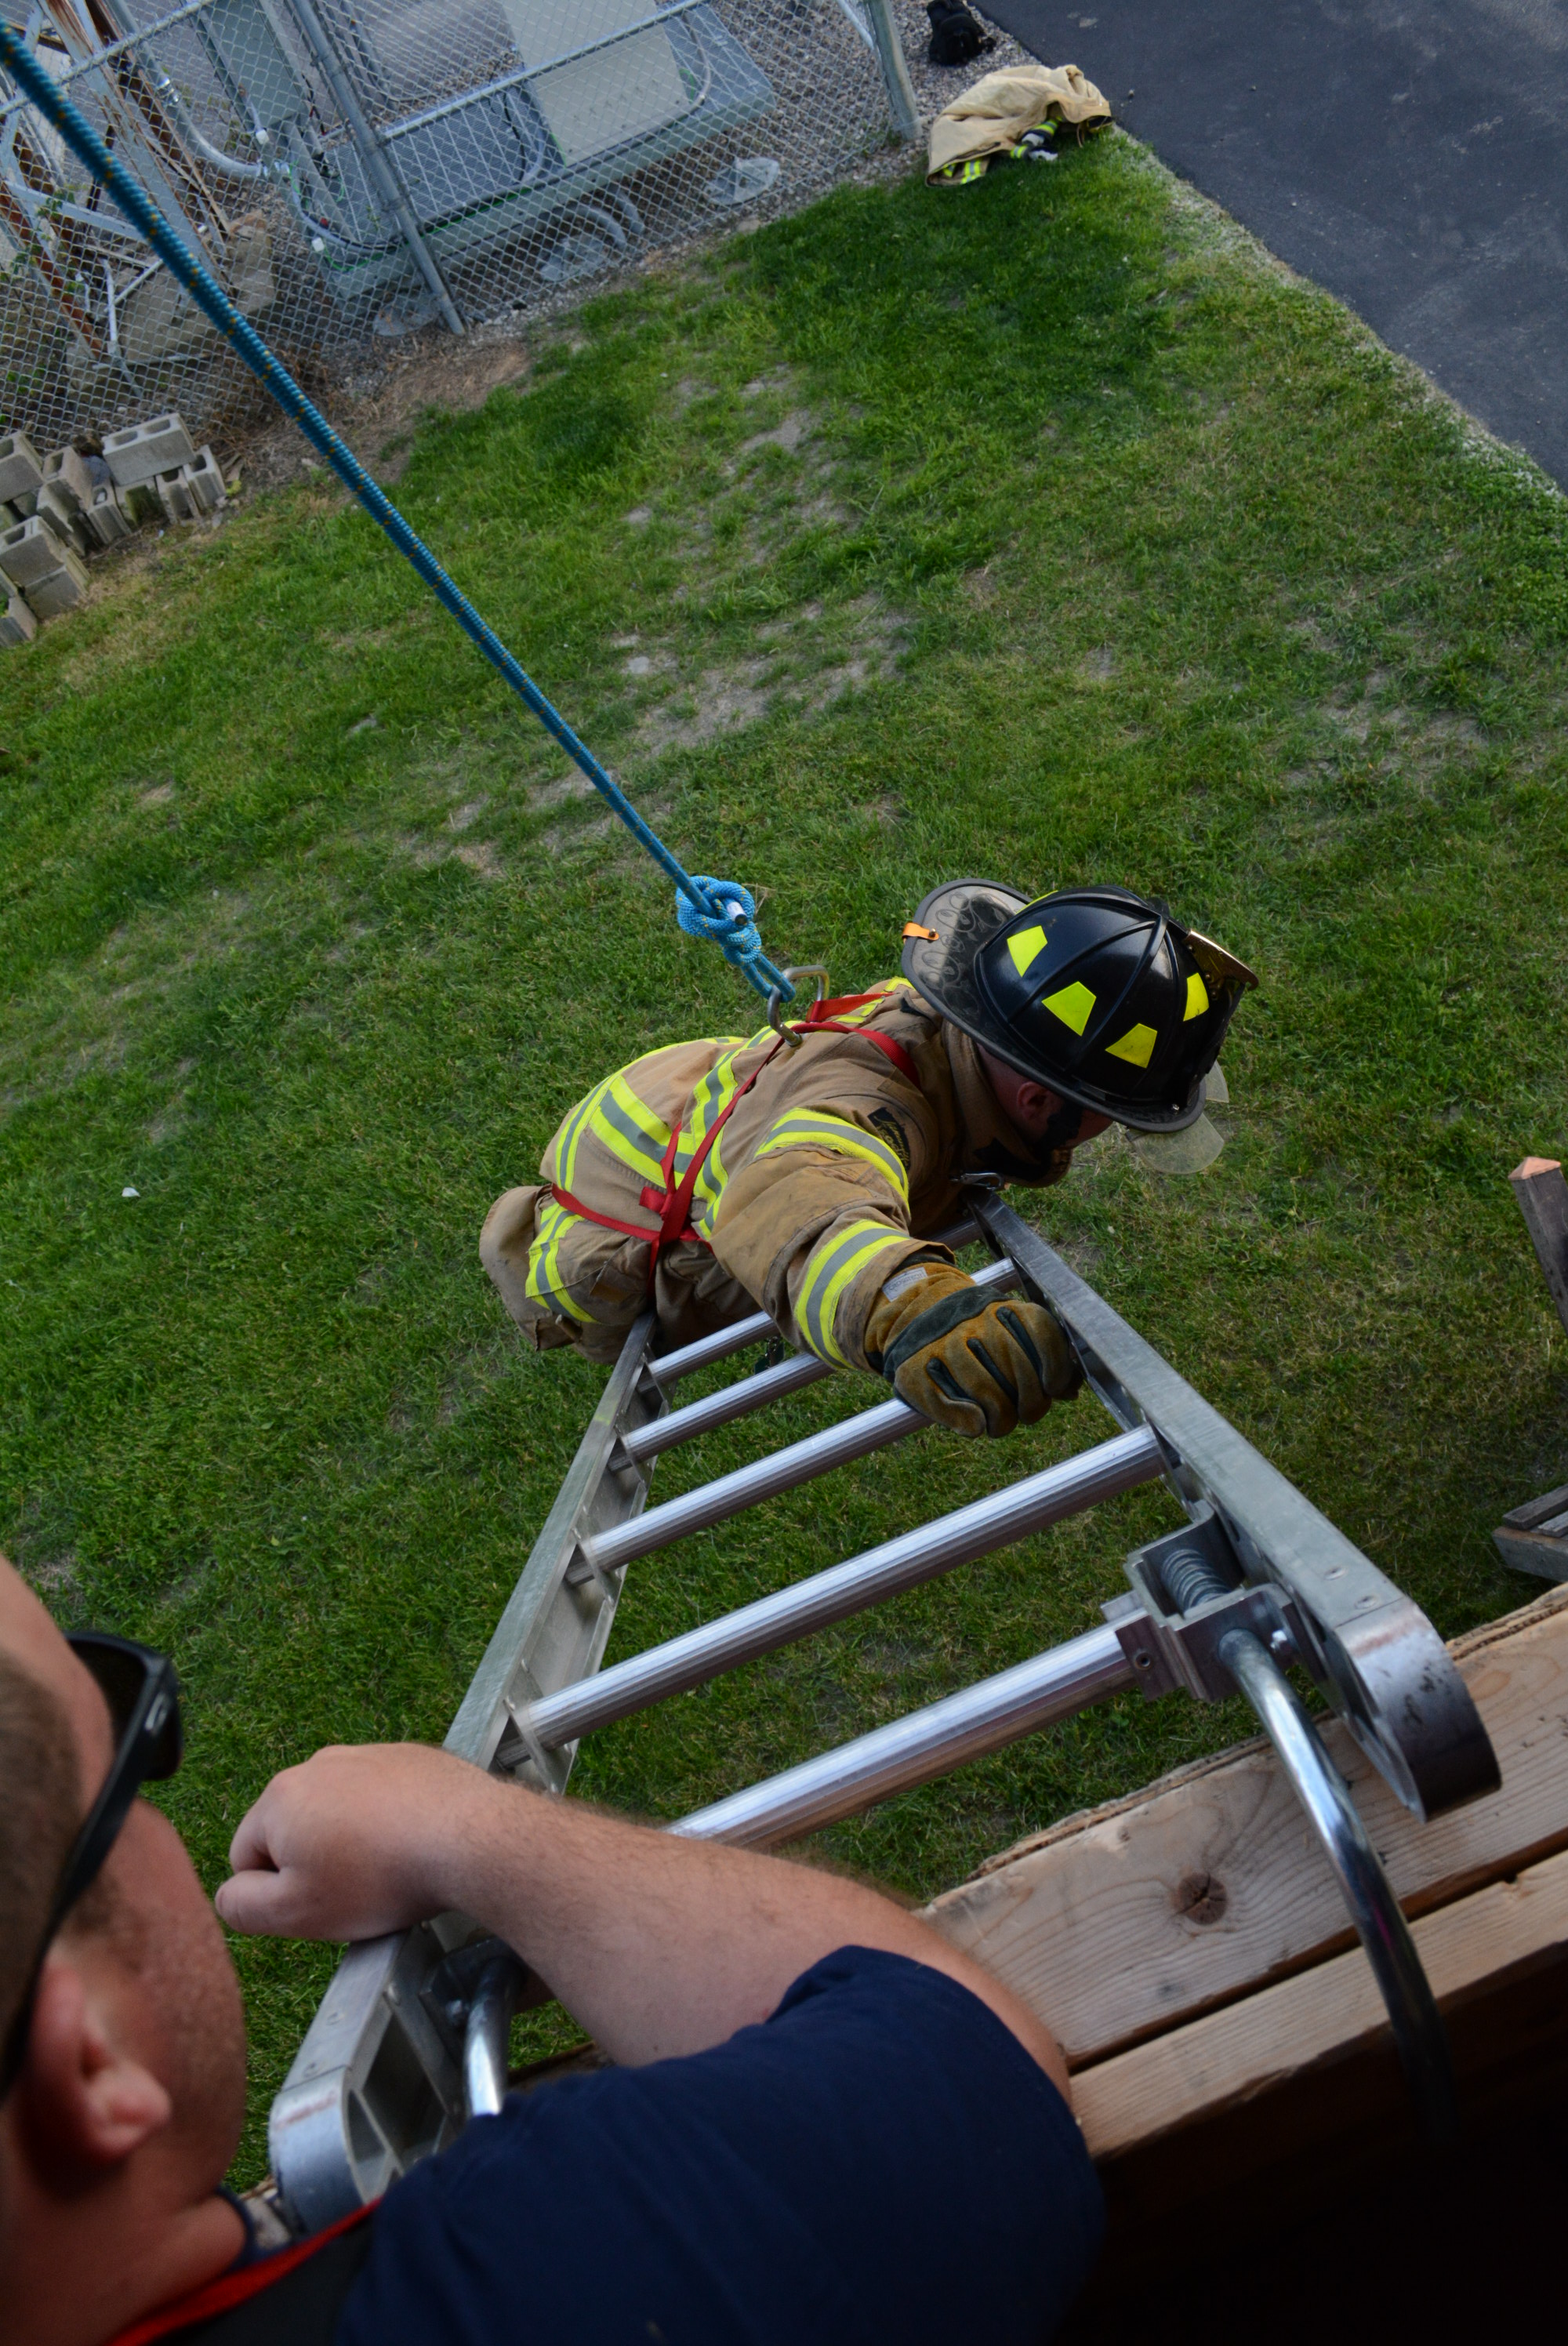 12-06-17  Training - Bail Outs - Window And Ladders